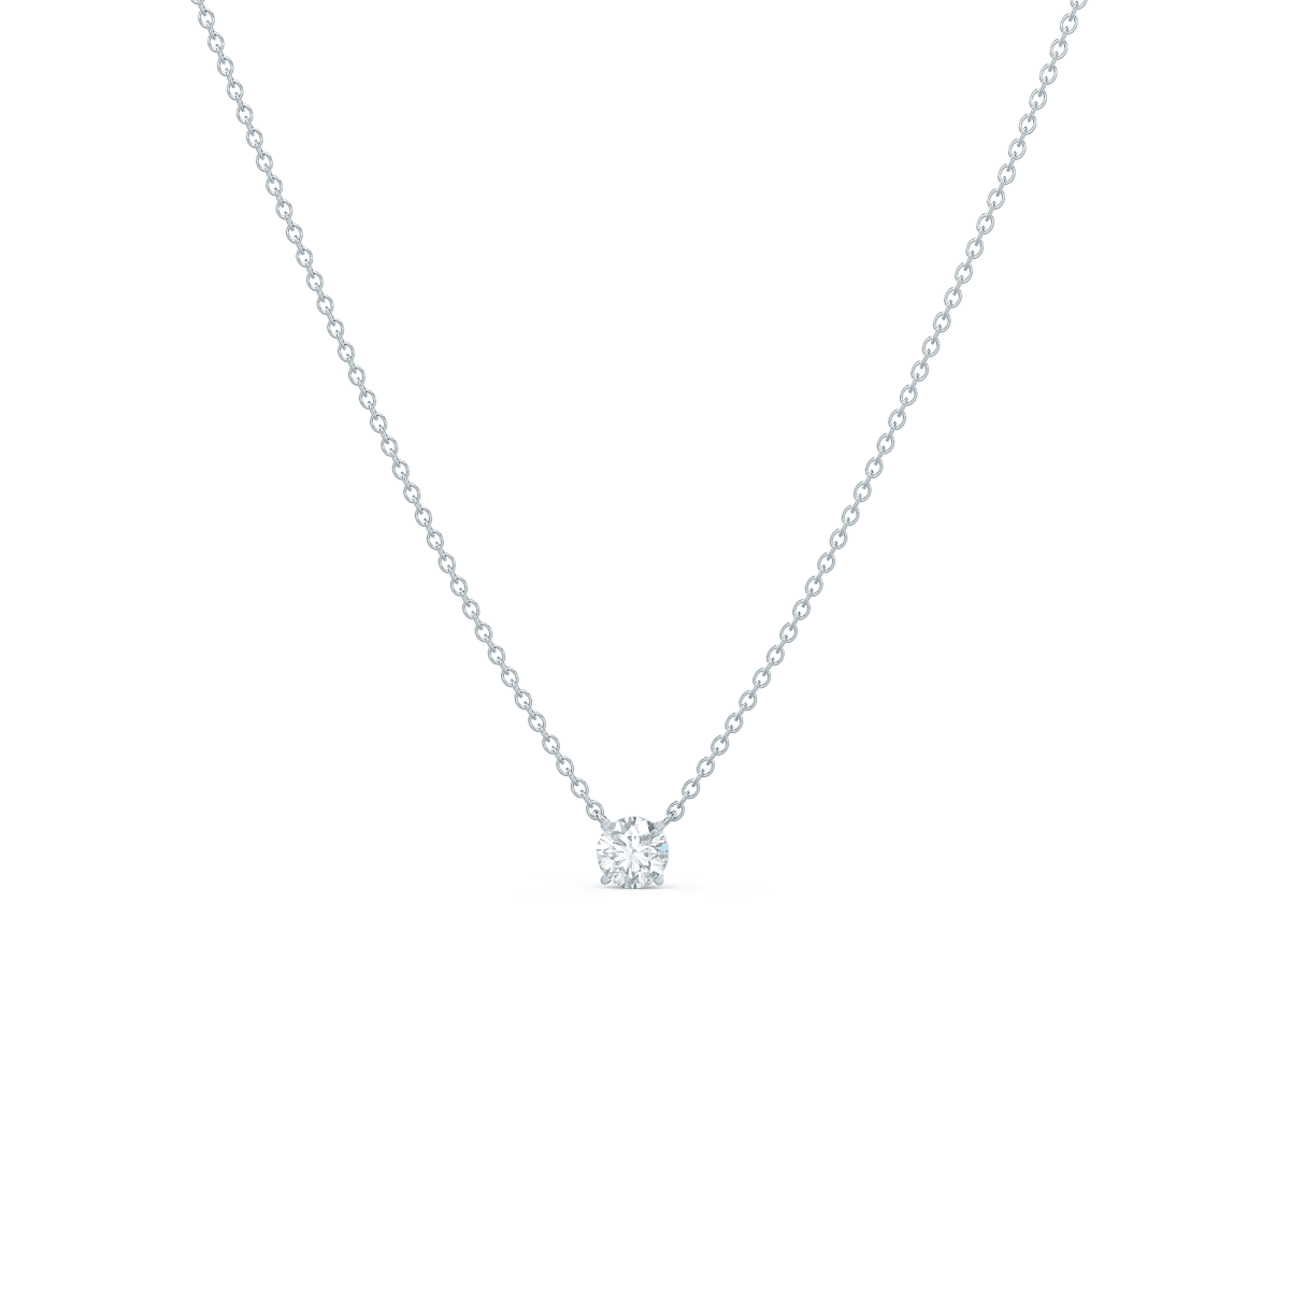 Shimmering Embrace Sparkling Clavicle Chain for Women - Silver 4